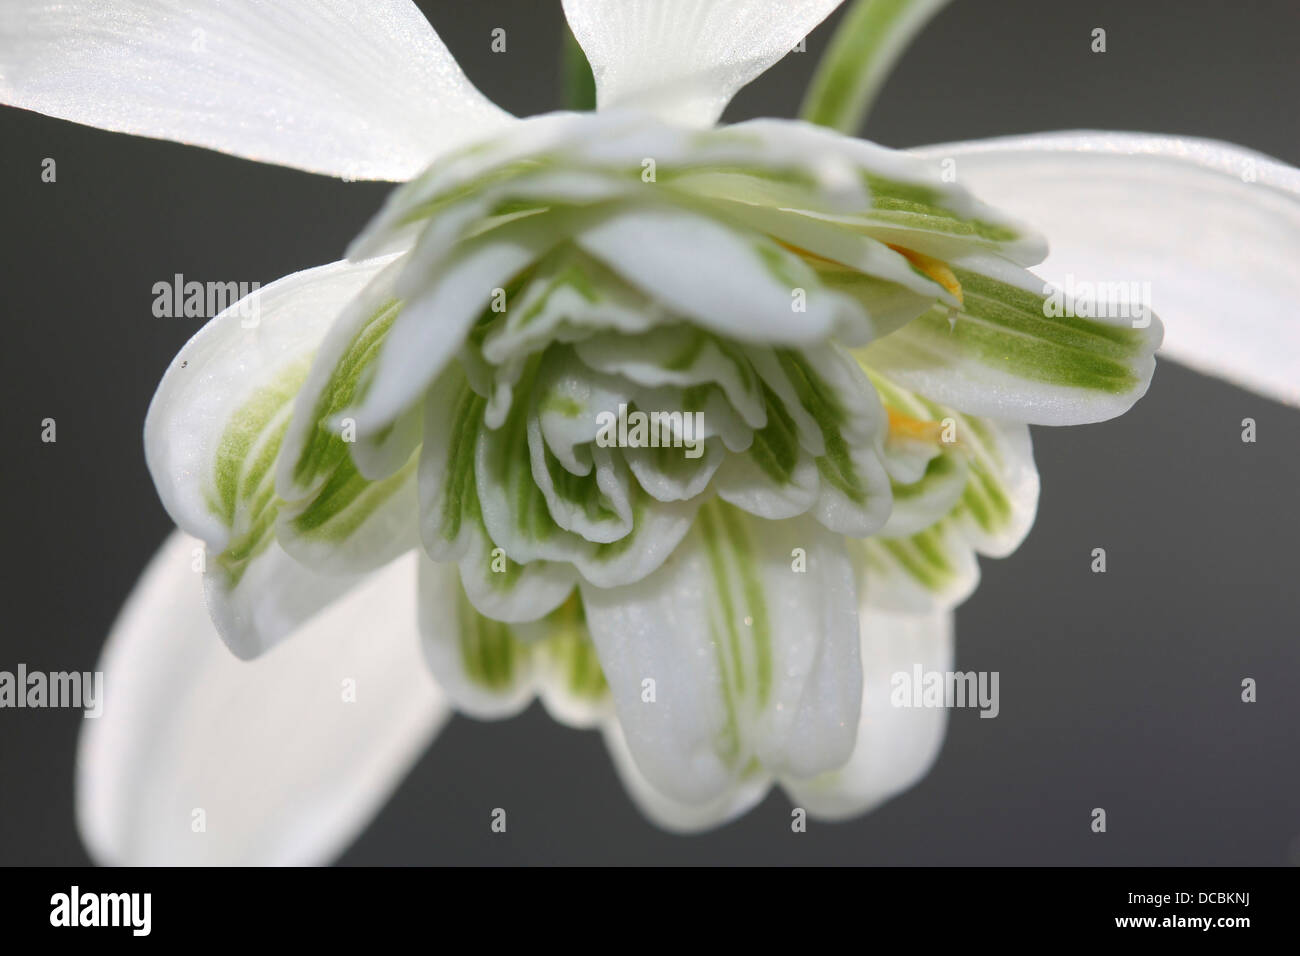 A close up picture of snowdrops showing the flower head and petals of green and white Stock Photo